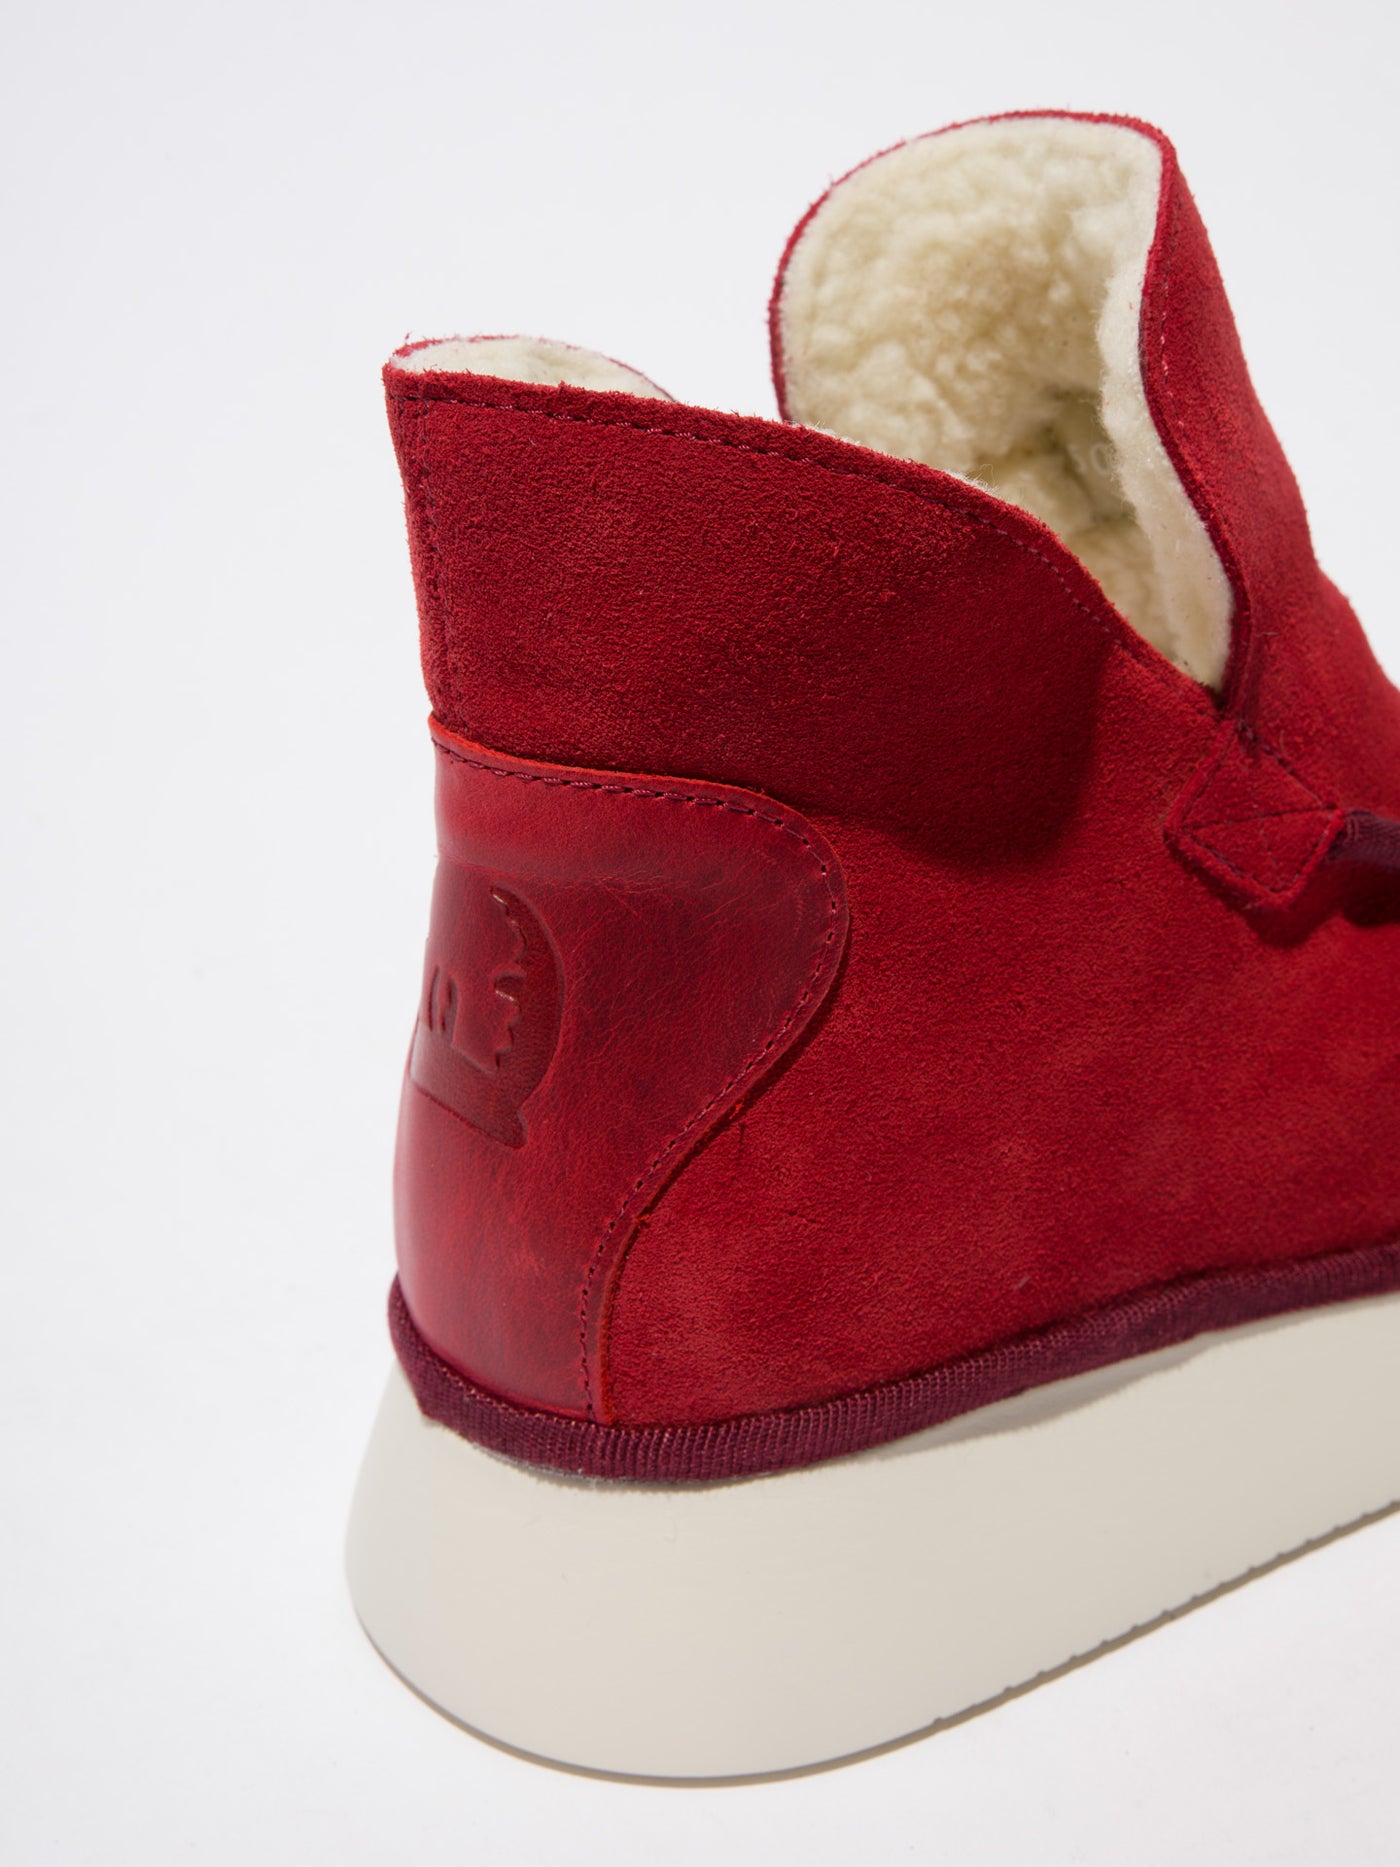 Round Toe Ankle Boots COZE348FLY SUEDE/RUG CARMINE RED